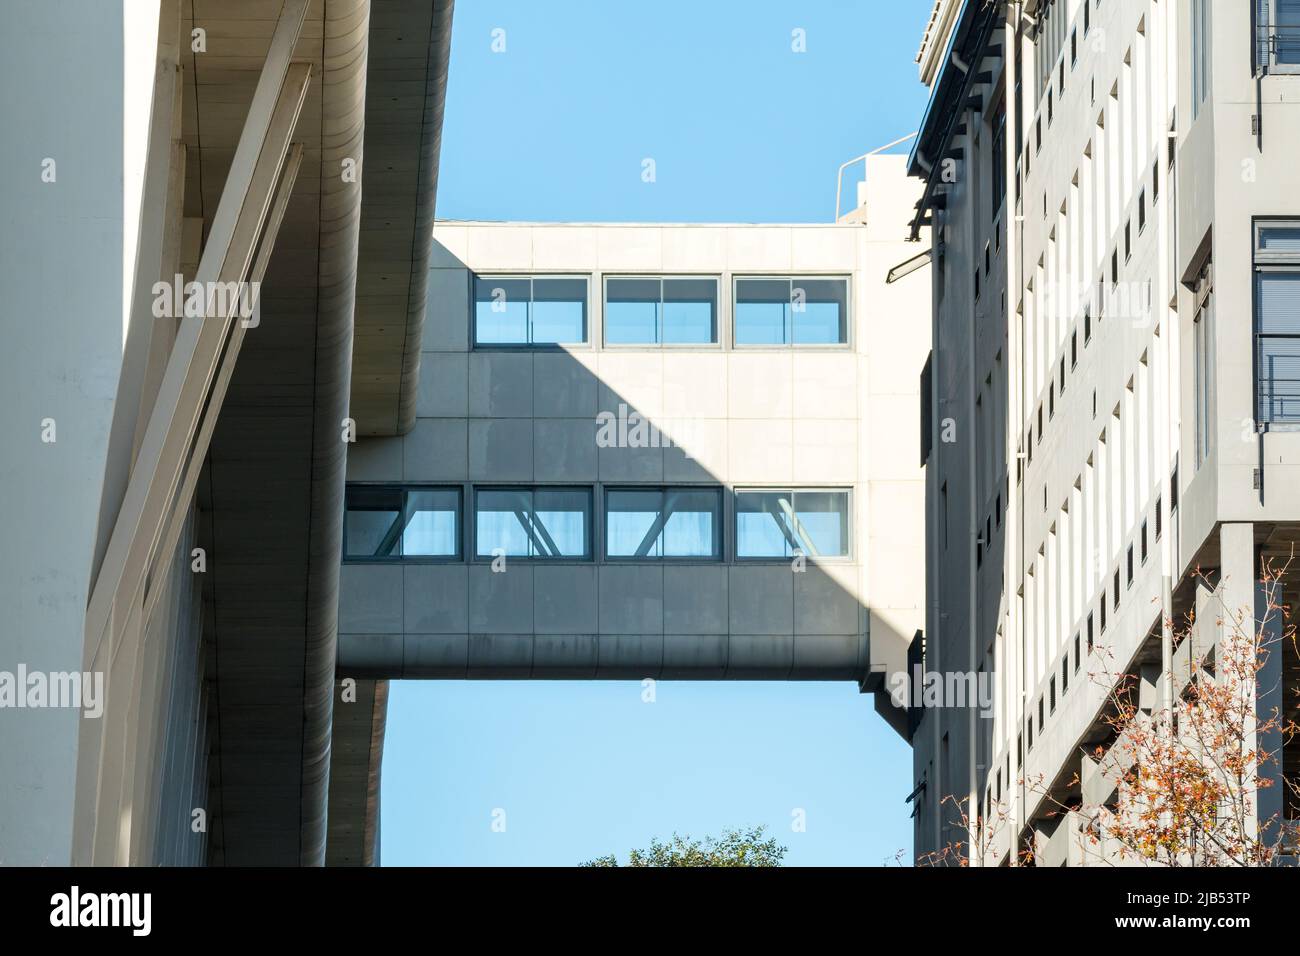 Skybridge or skyway system which is an interconnecting bridge between two buildings closeup on a building showing architectural elements and design Stock Photo